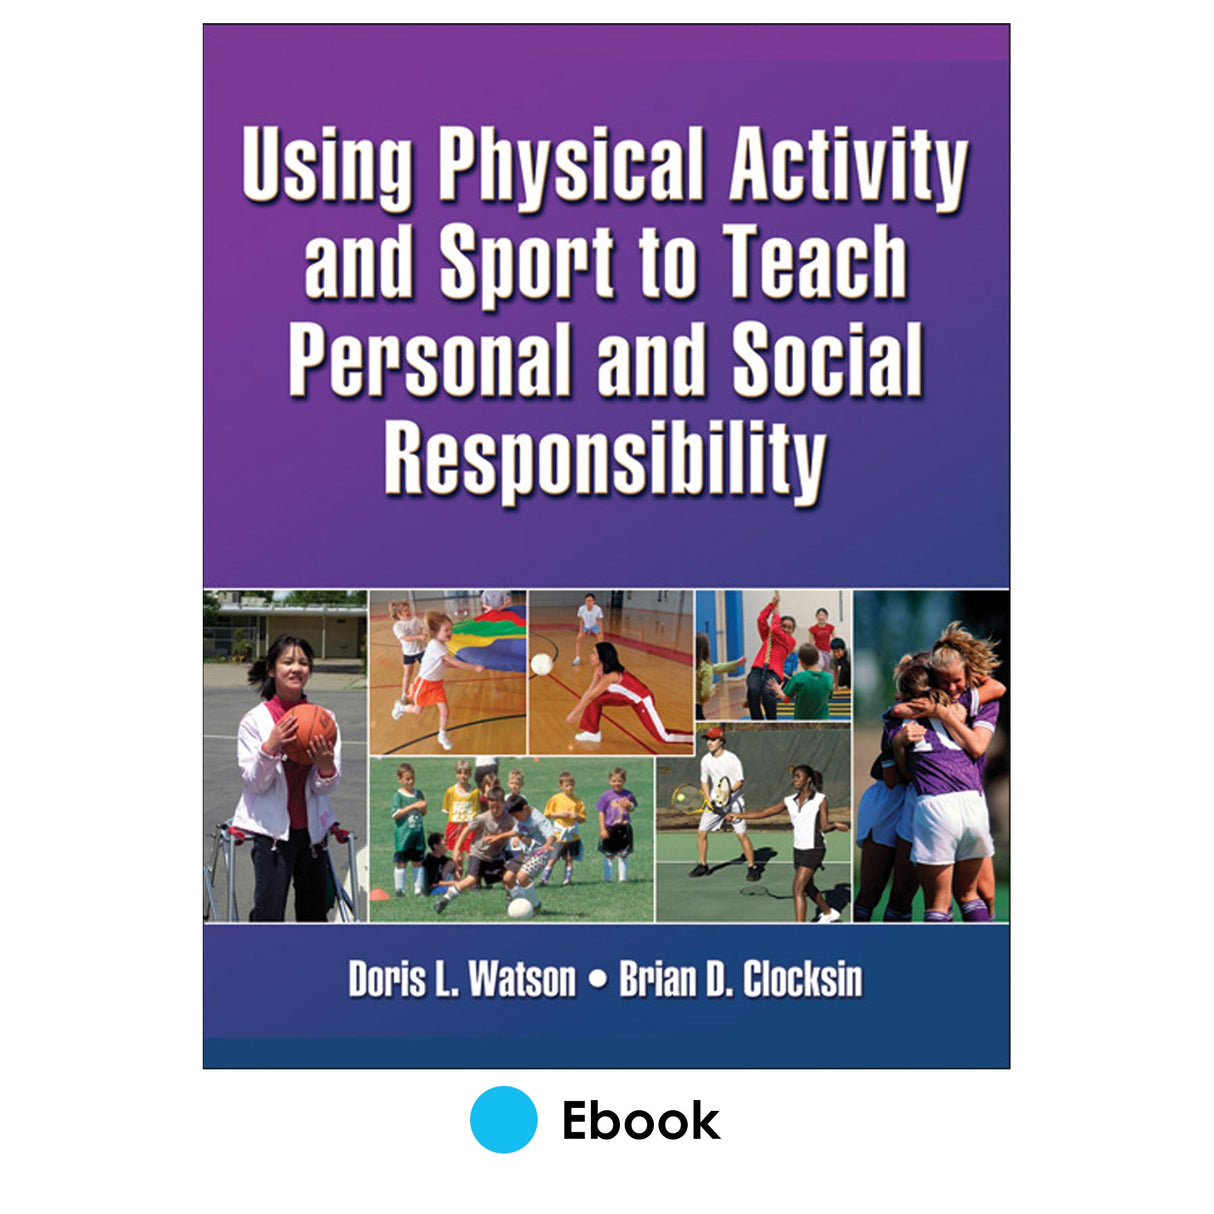 Using Physical Activity and Sport to Teach Personal and Social Responsibility PDF